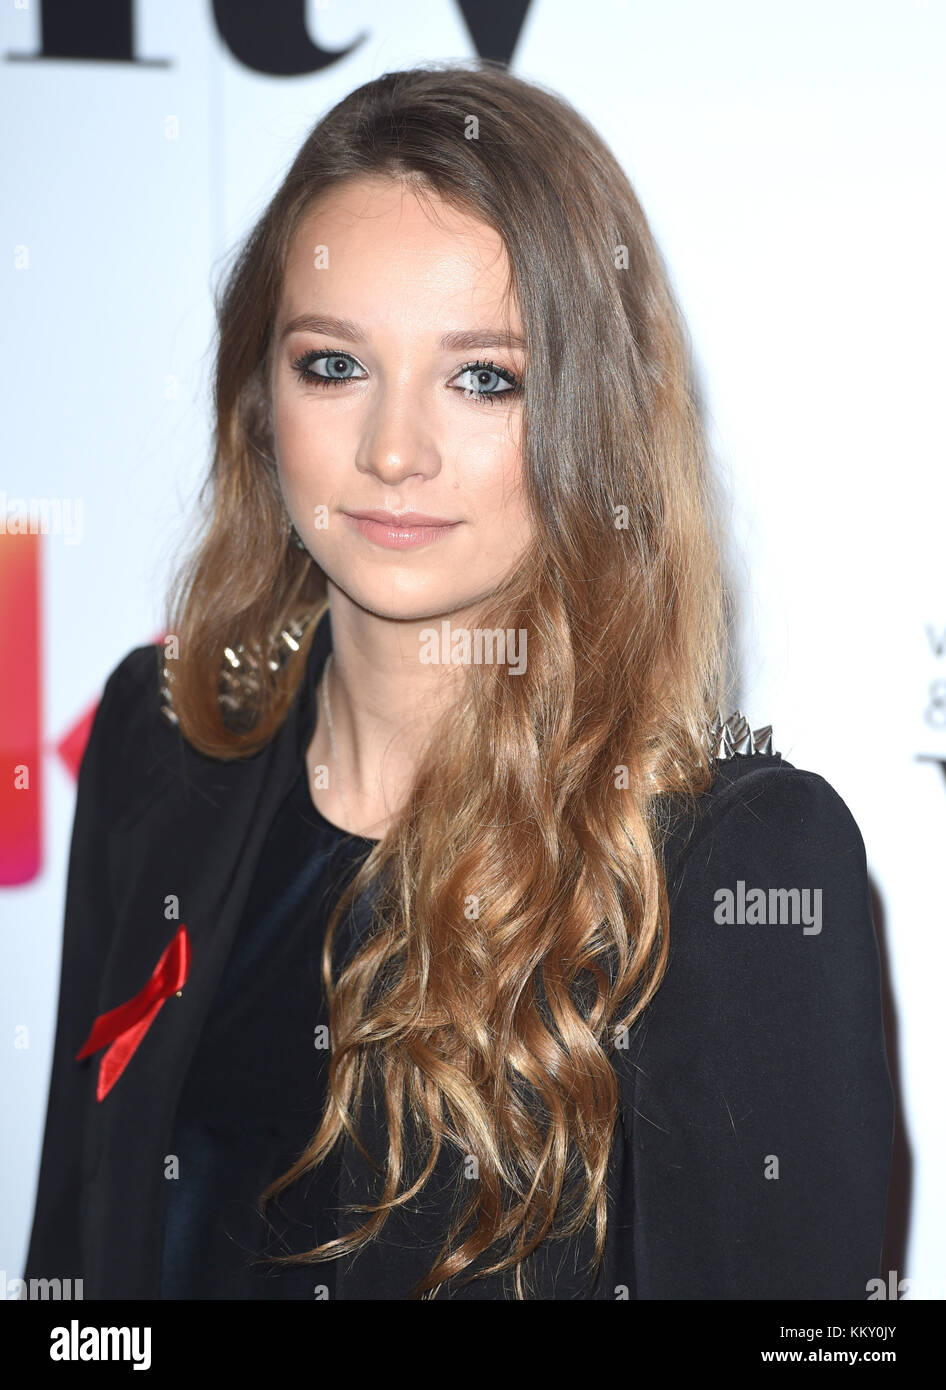 Photo Must Be Credited ©Alpha Press 079965 01/12/2017 Molly Windsor ...